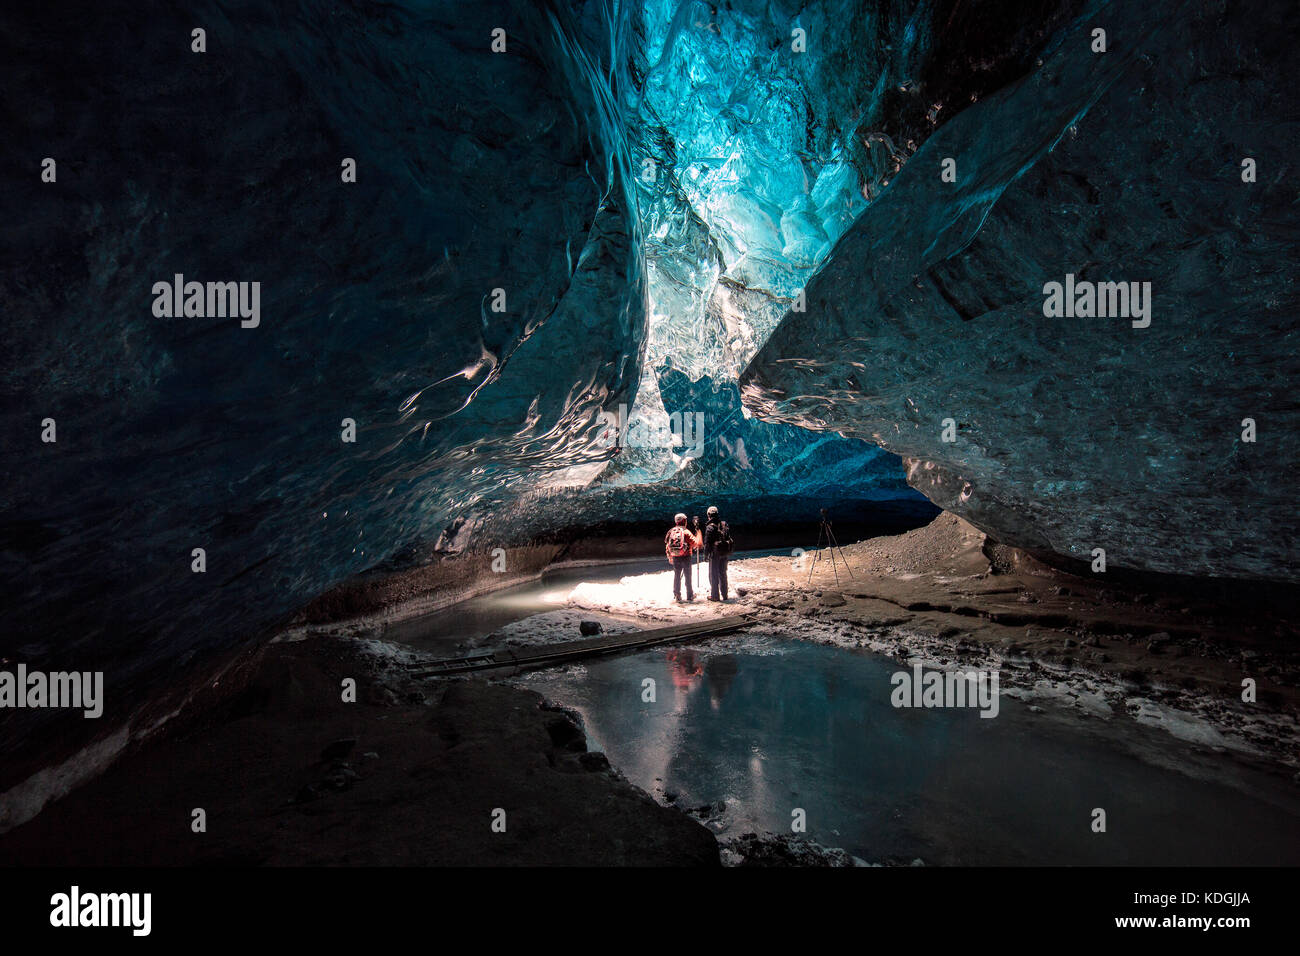 Tour guide with tourist inside a ice cave, showing fantastic colors and texture as well as the scale Stock Photo